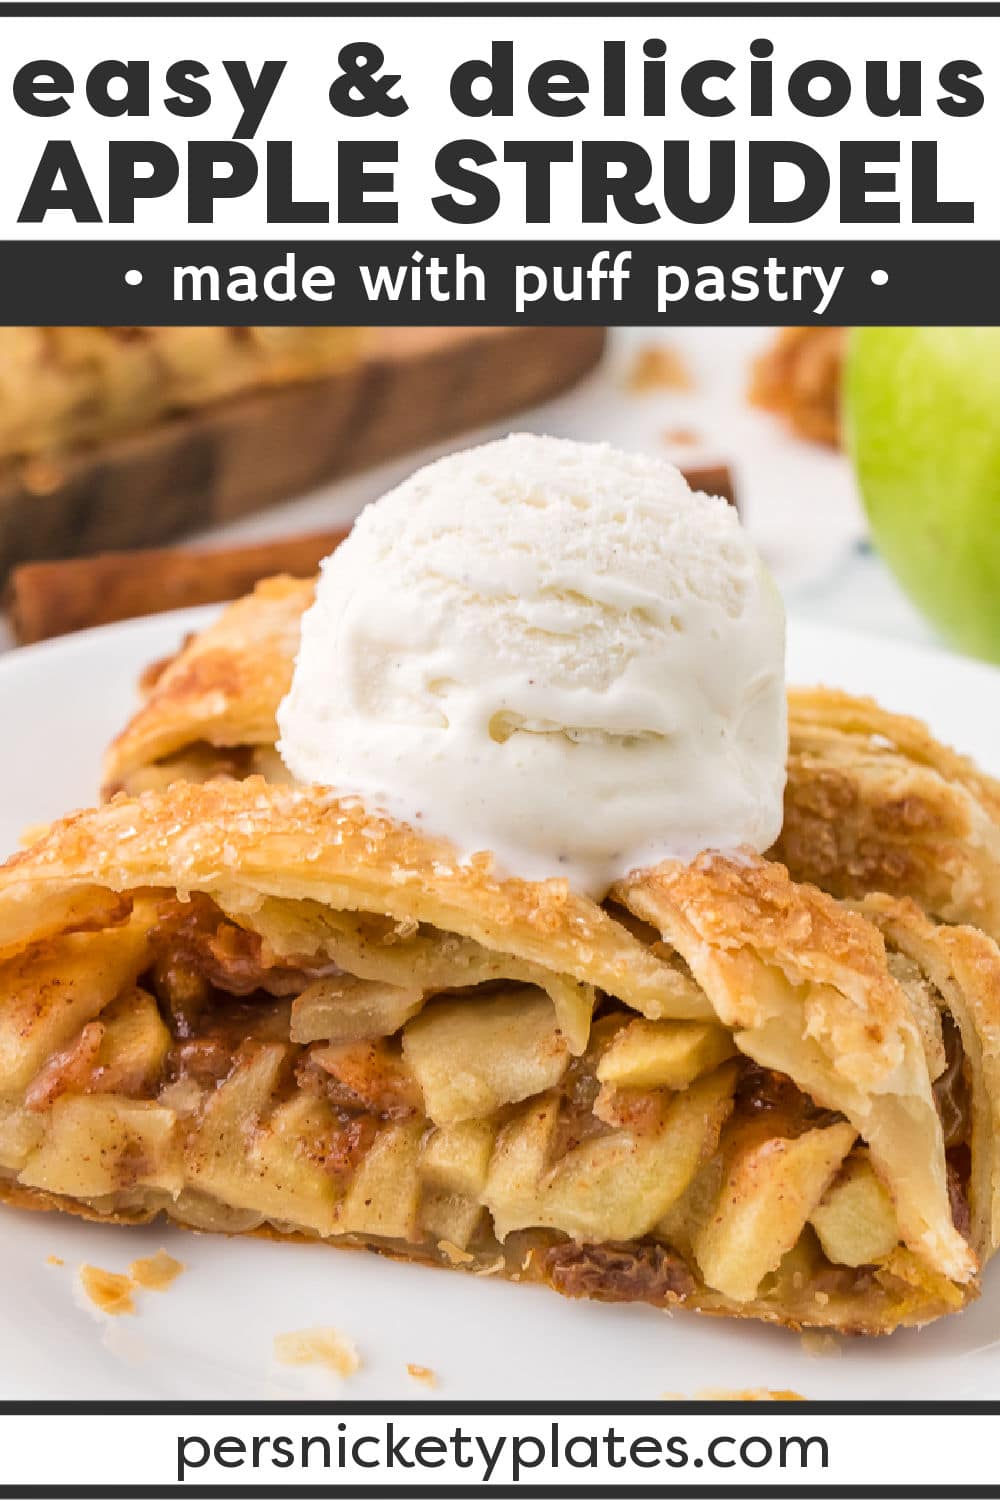 This easy Apple Strudel may look fancy but it's so simple to put together! Puff pastry dough is filled with apples, cinnamon, brown sugar, and raisins, brushed with melted butter, sprinkled with turbinado sugar and baked until golden brown. Perfect for special occasions but easy enough for any day! | www.persnicketyplates.com